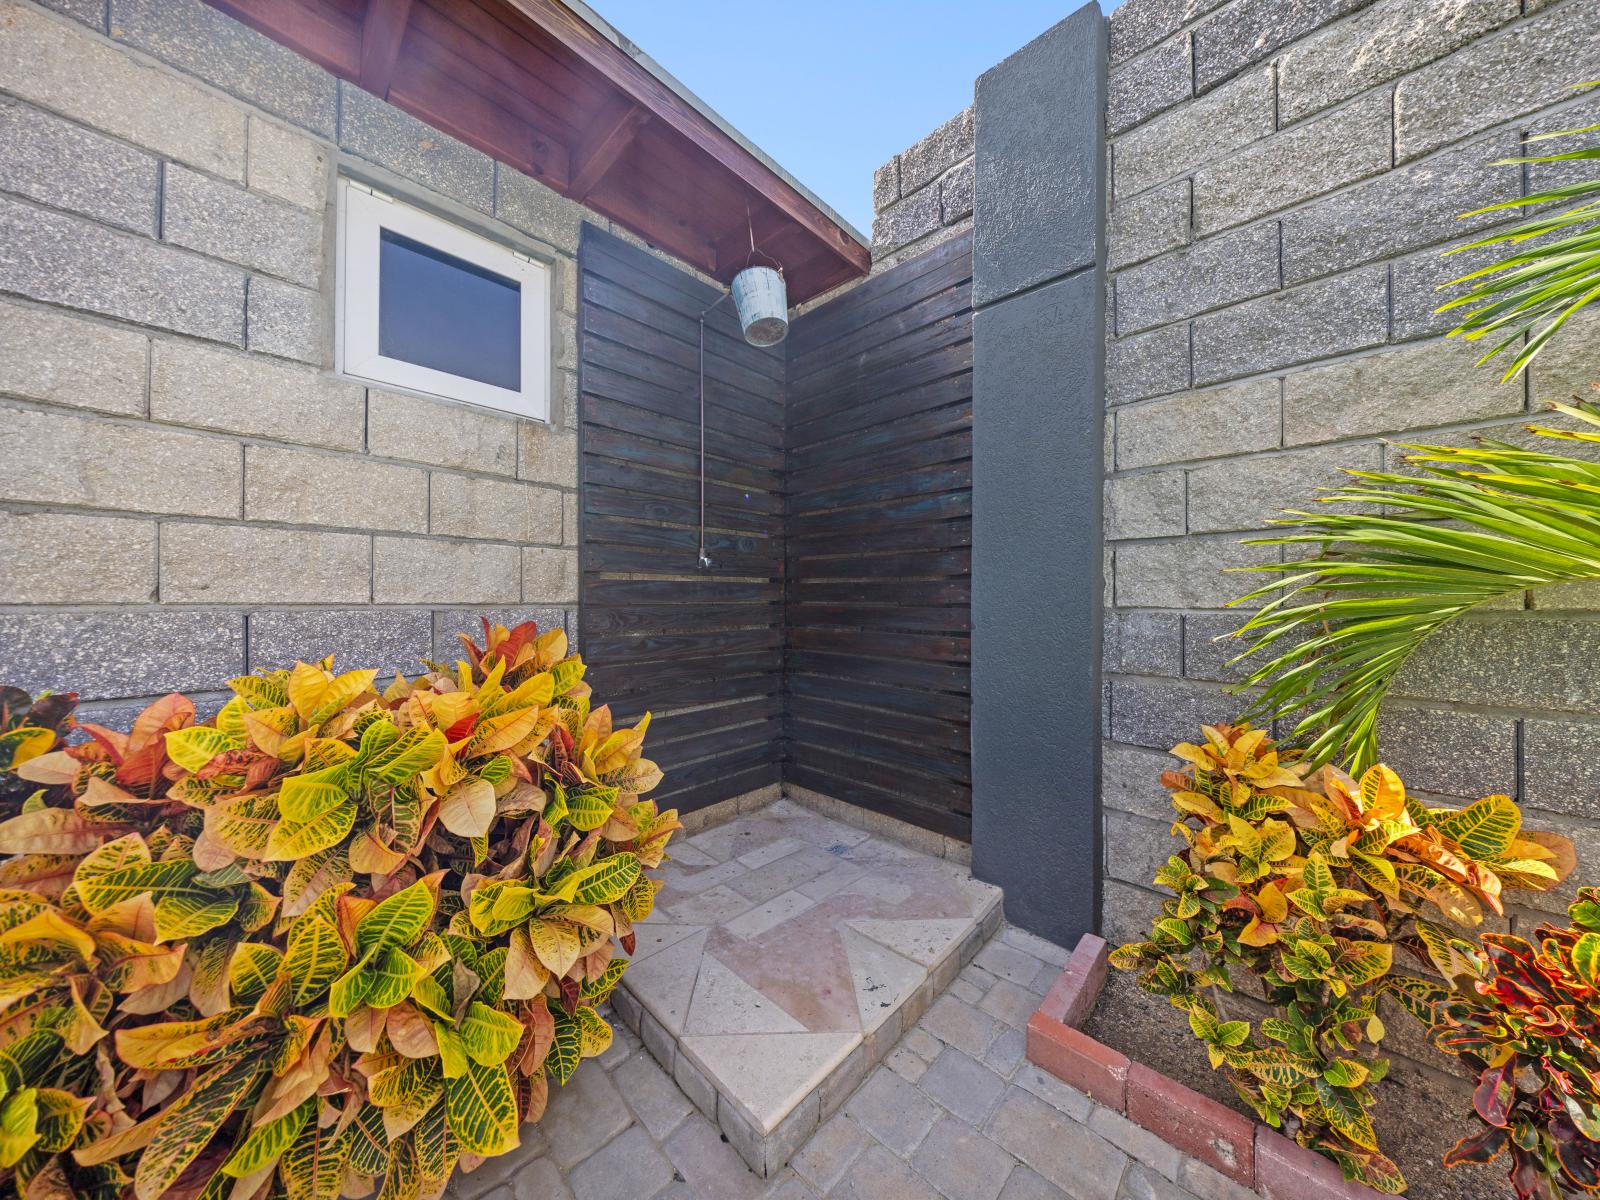 Refreshing outdoor shower of the home in Aruba - Dive into luxury in your own private pool, where relaxation and indulgence await - Find solace in the simplicity of outdoor space, where worries fade away